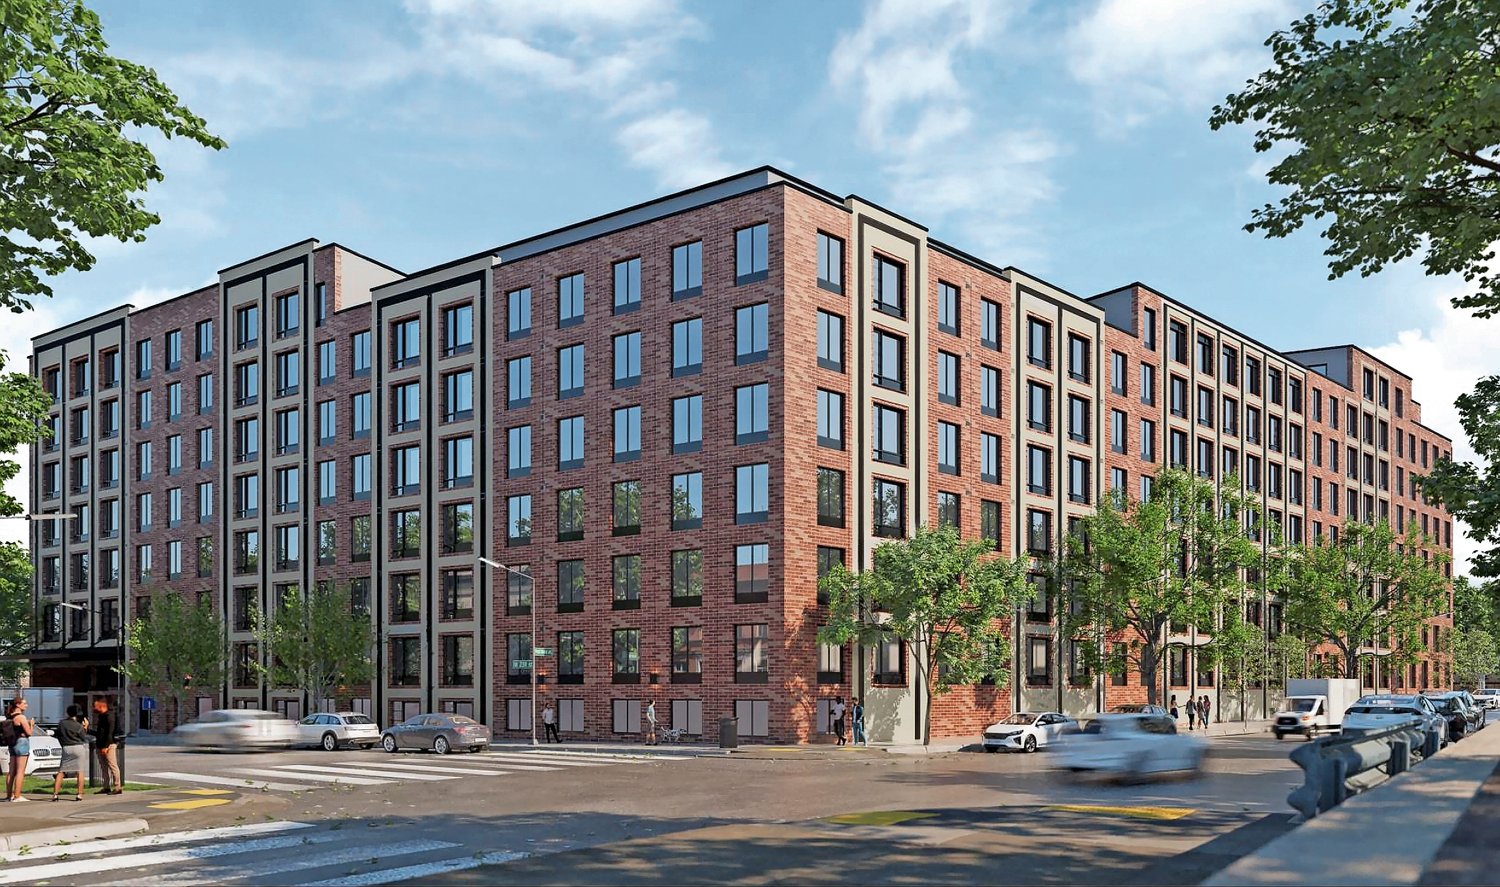 Tishman Speyer’s newest rendering of 160 Van Cortlandt Park S. shows the 8-story building from the corner of West 239th Street and Putnam Avenue.